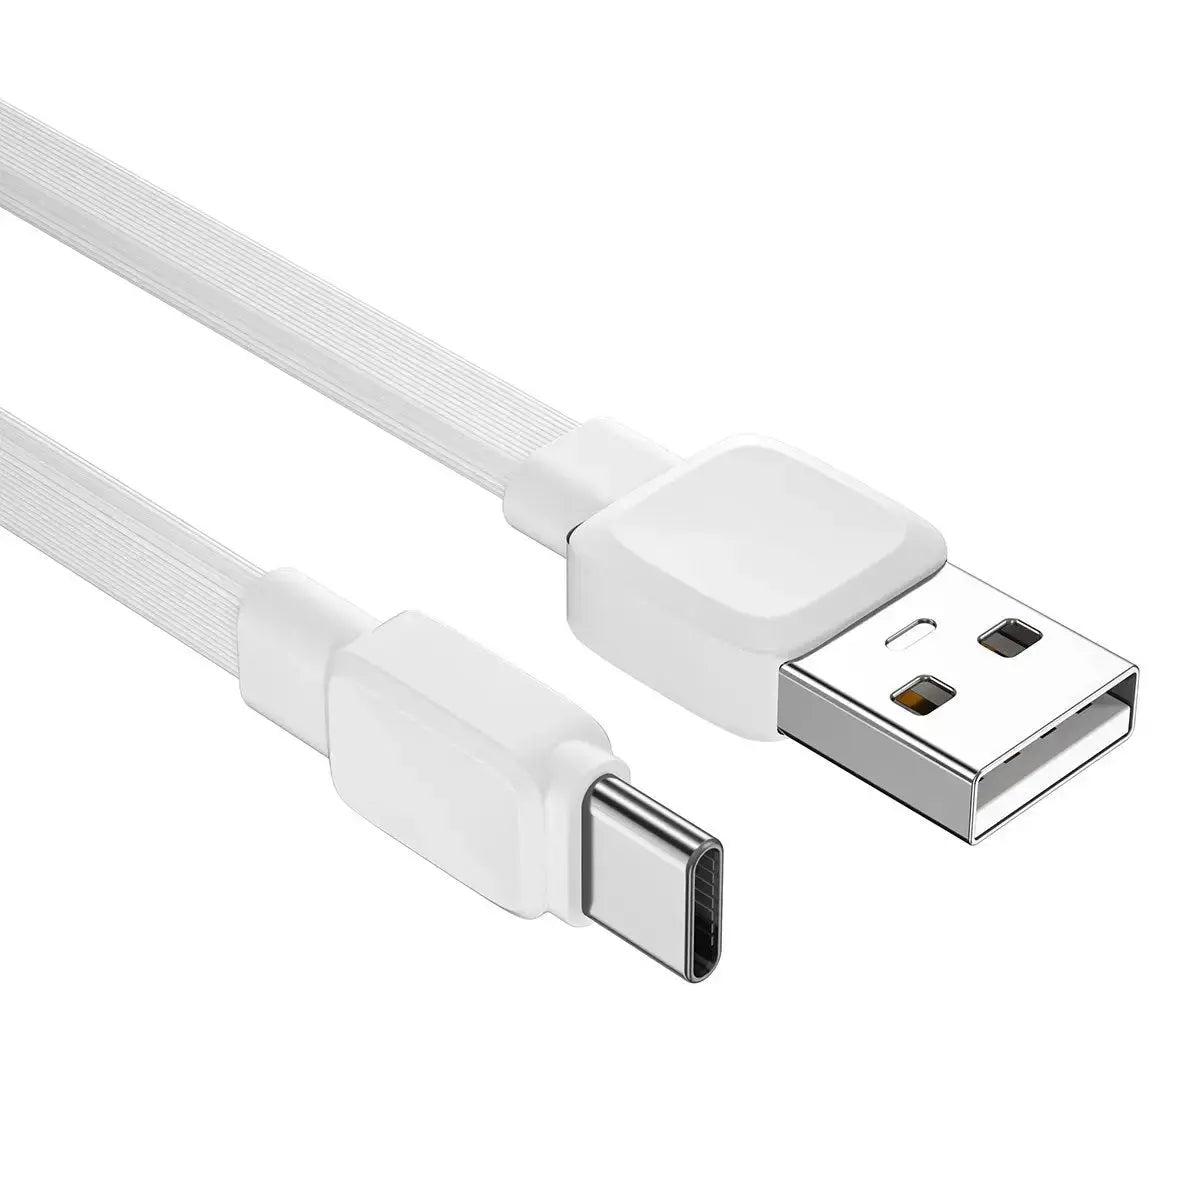 Cable USB a Tipo-C Blanco